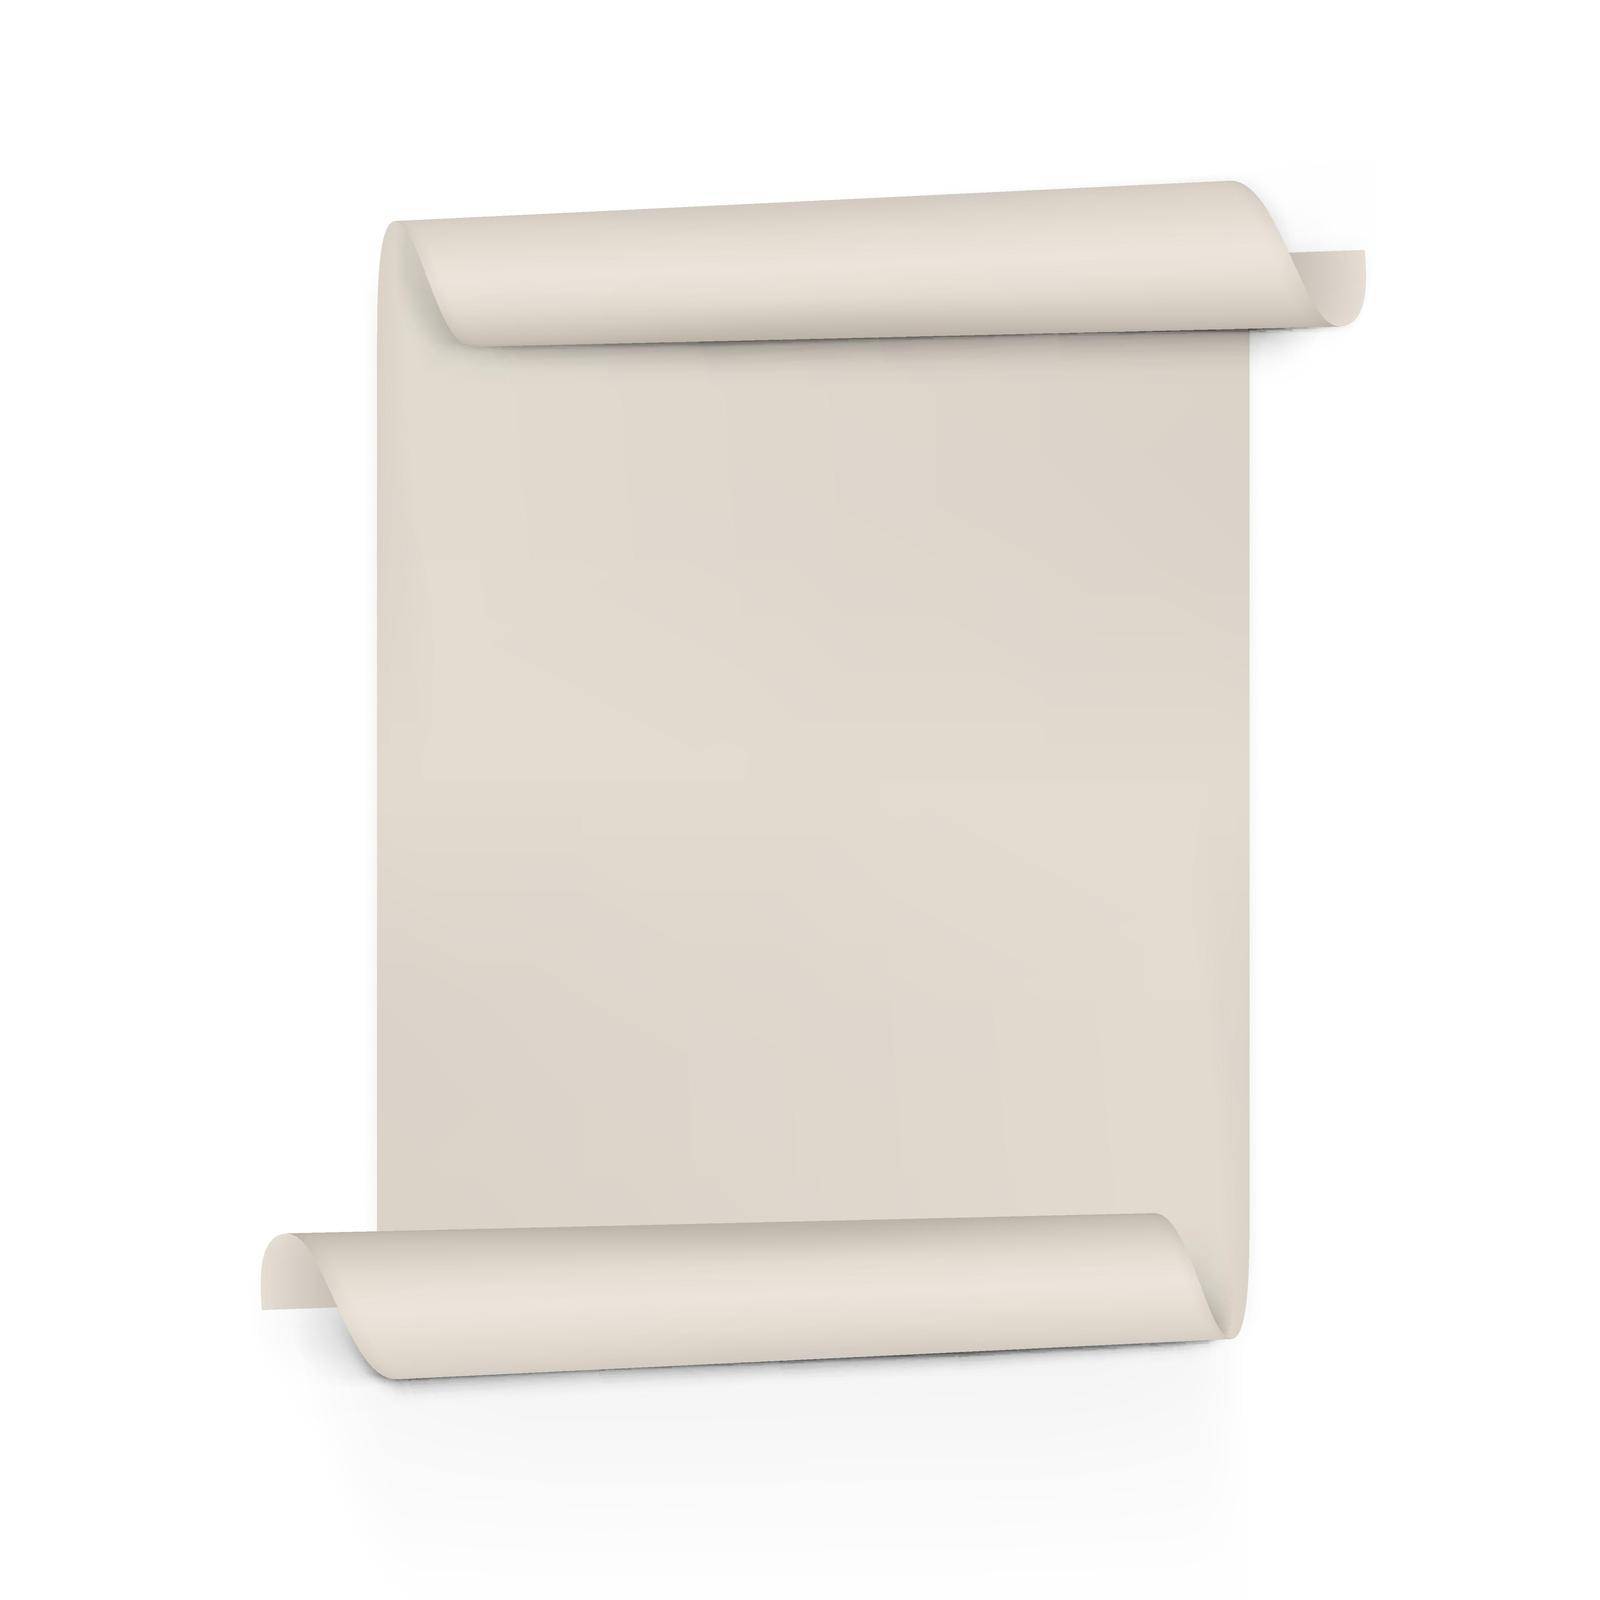 Clear Dark Paper Scroll. Sheet Roll On Both Sides. EPS10 Vector